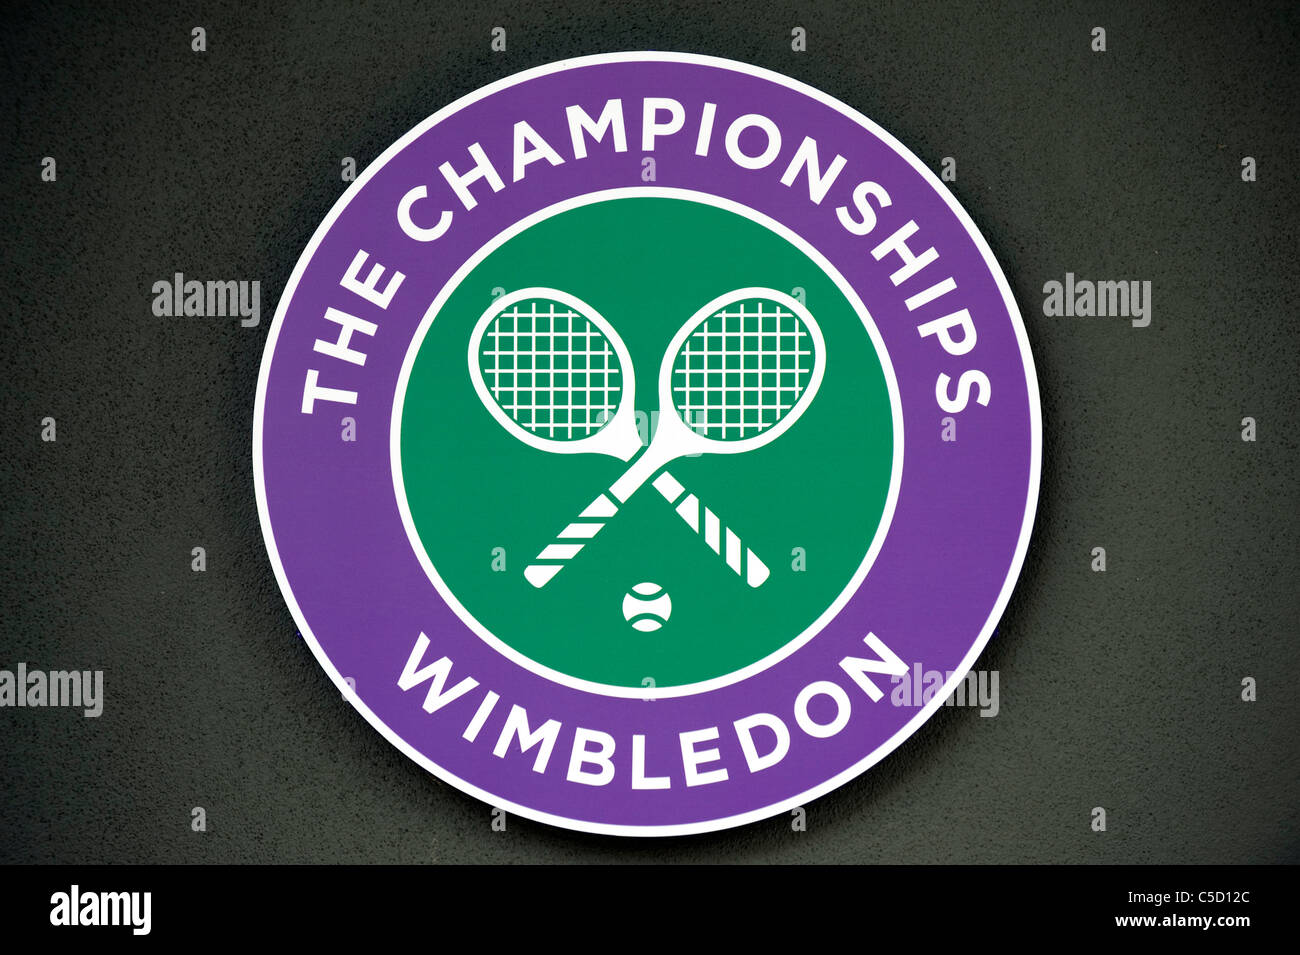 Wimbledon logo sign in the grounds during the 2011 Wimbledon Tennis Championships Stock Photo